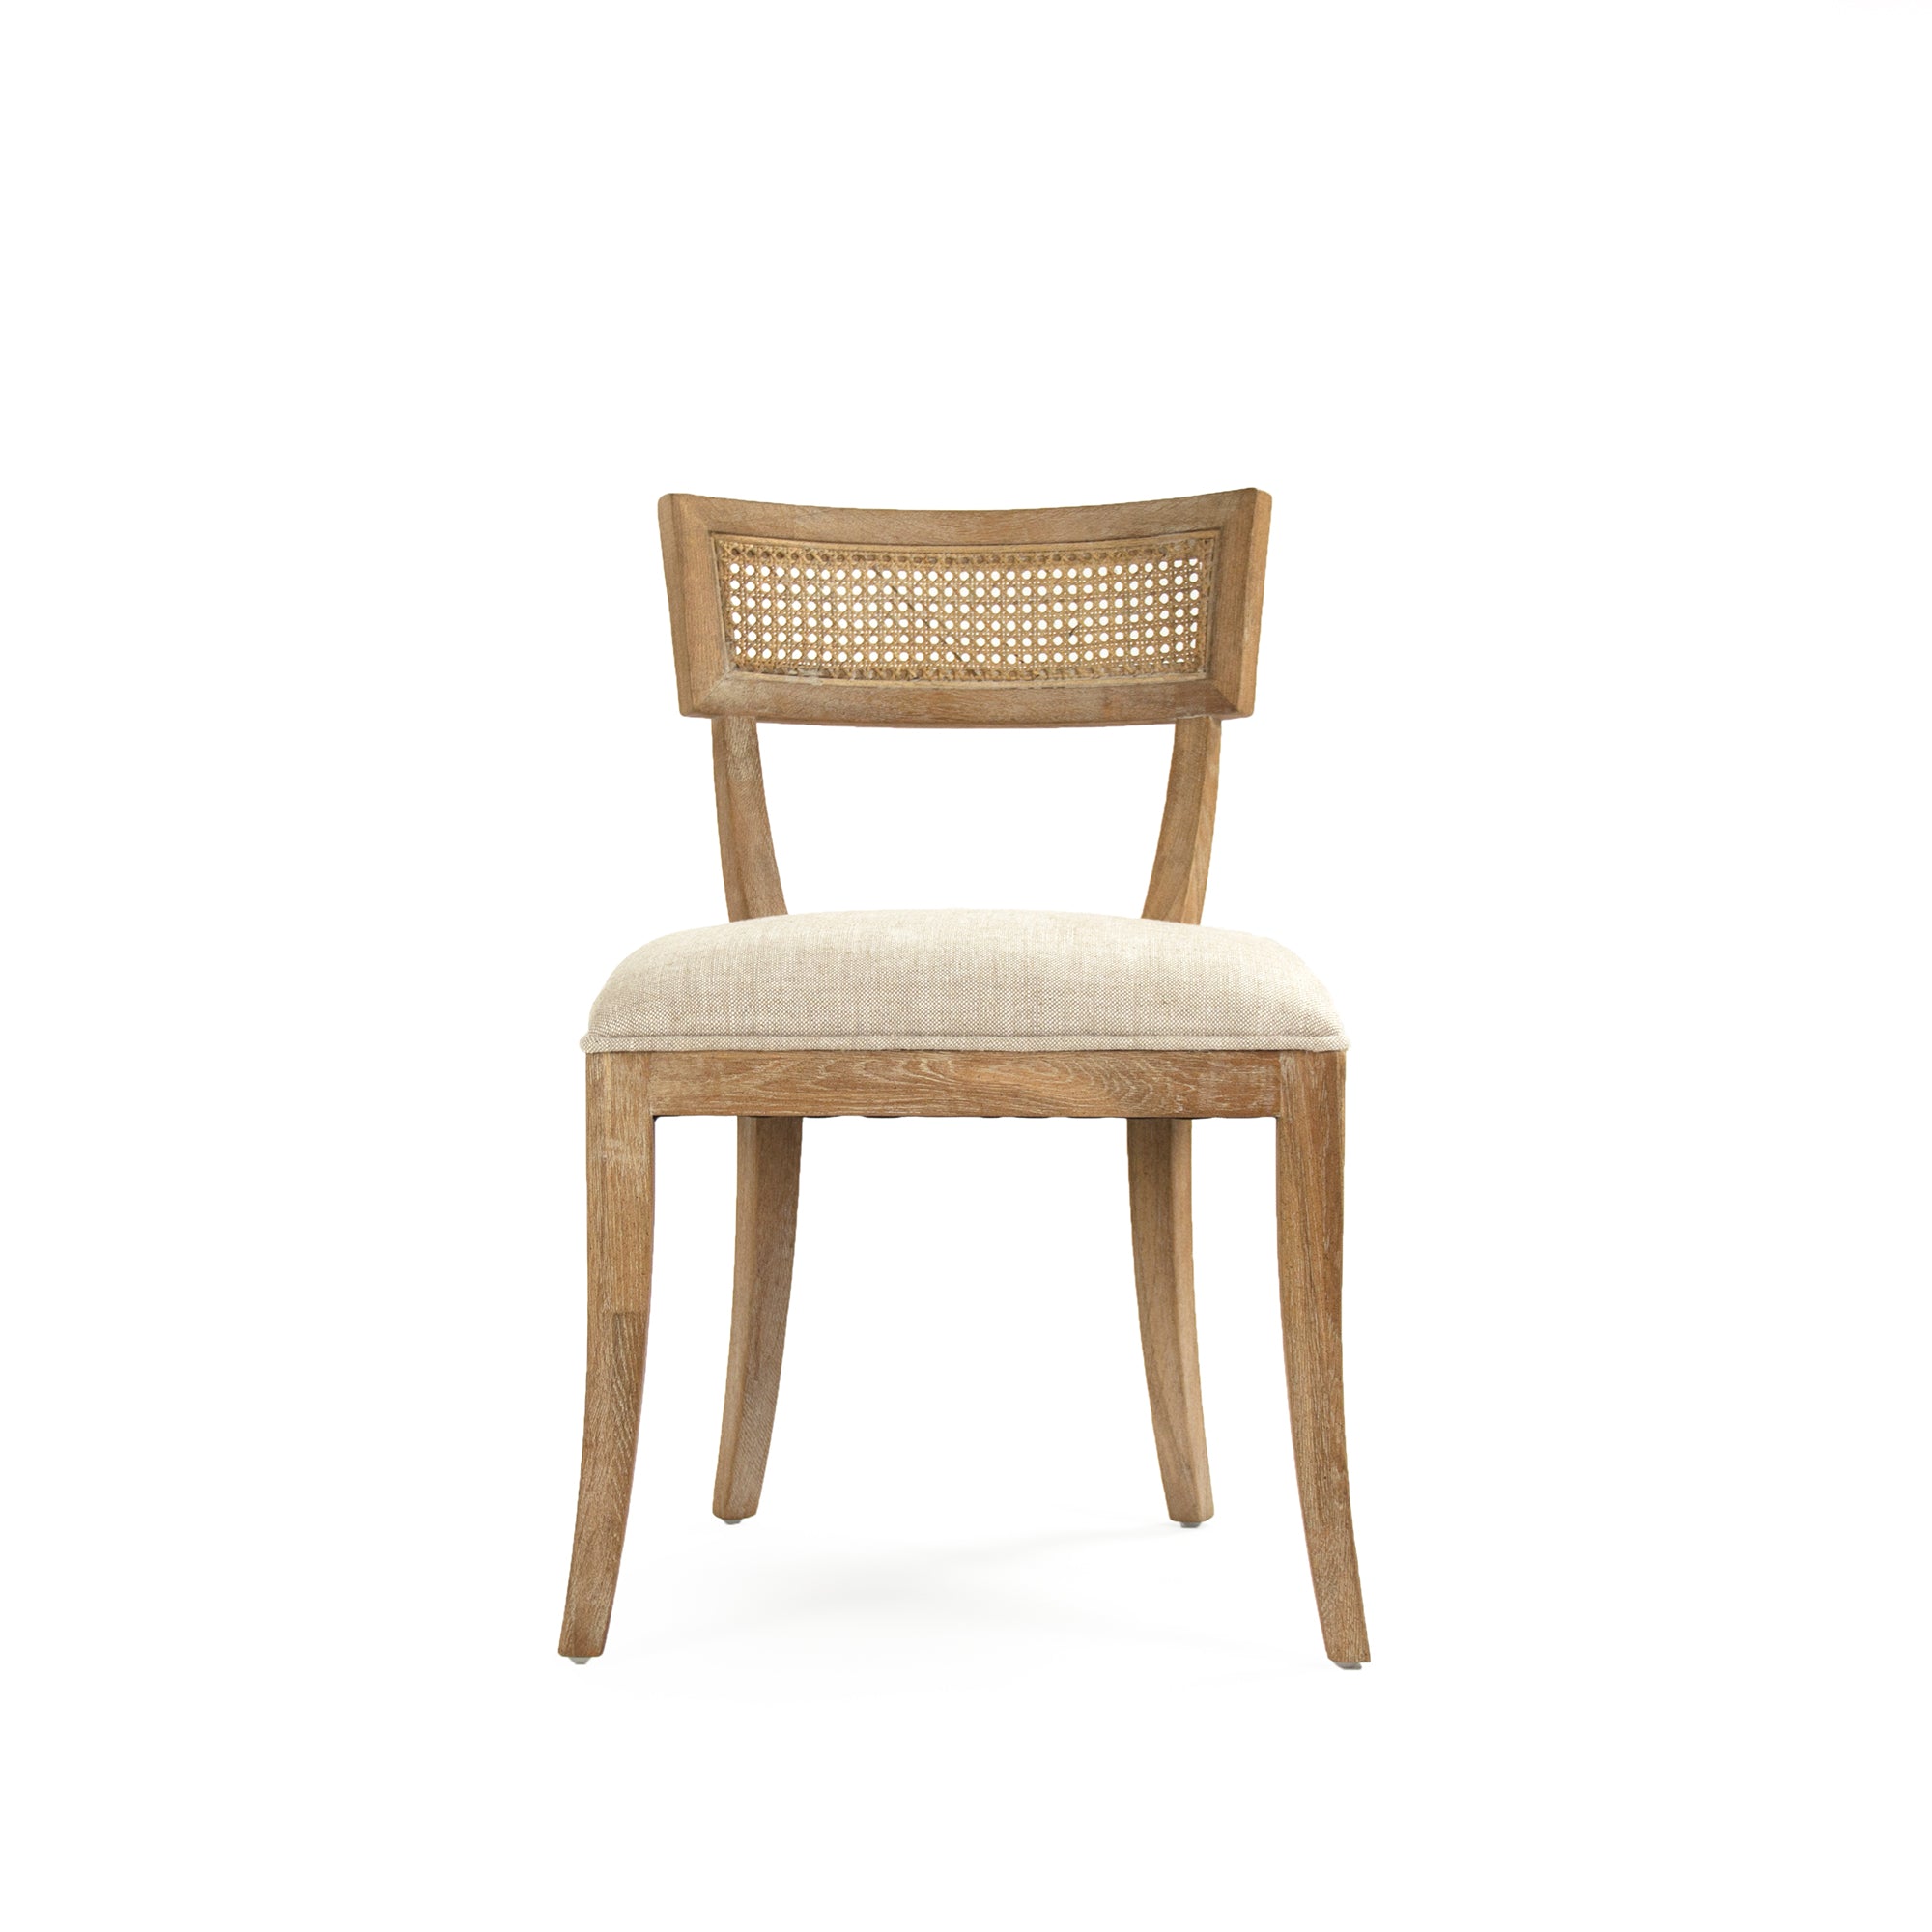 Carvell Caned Back Side Chair